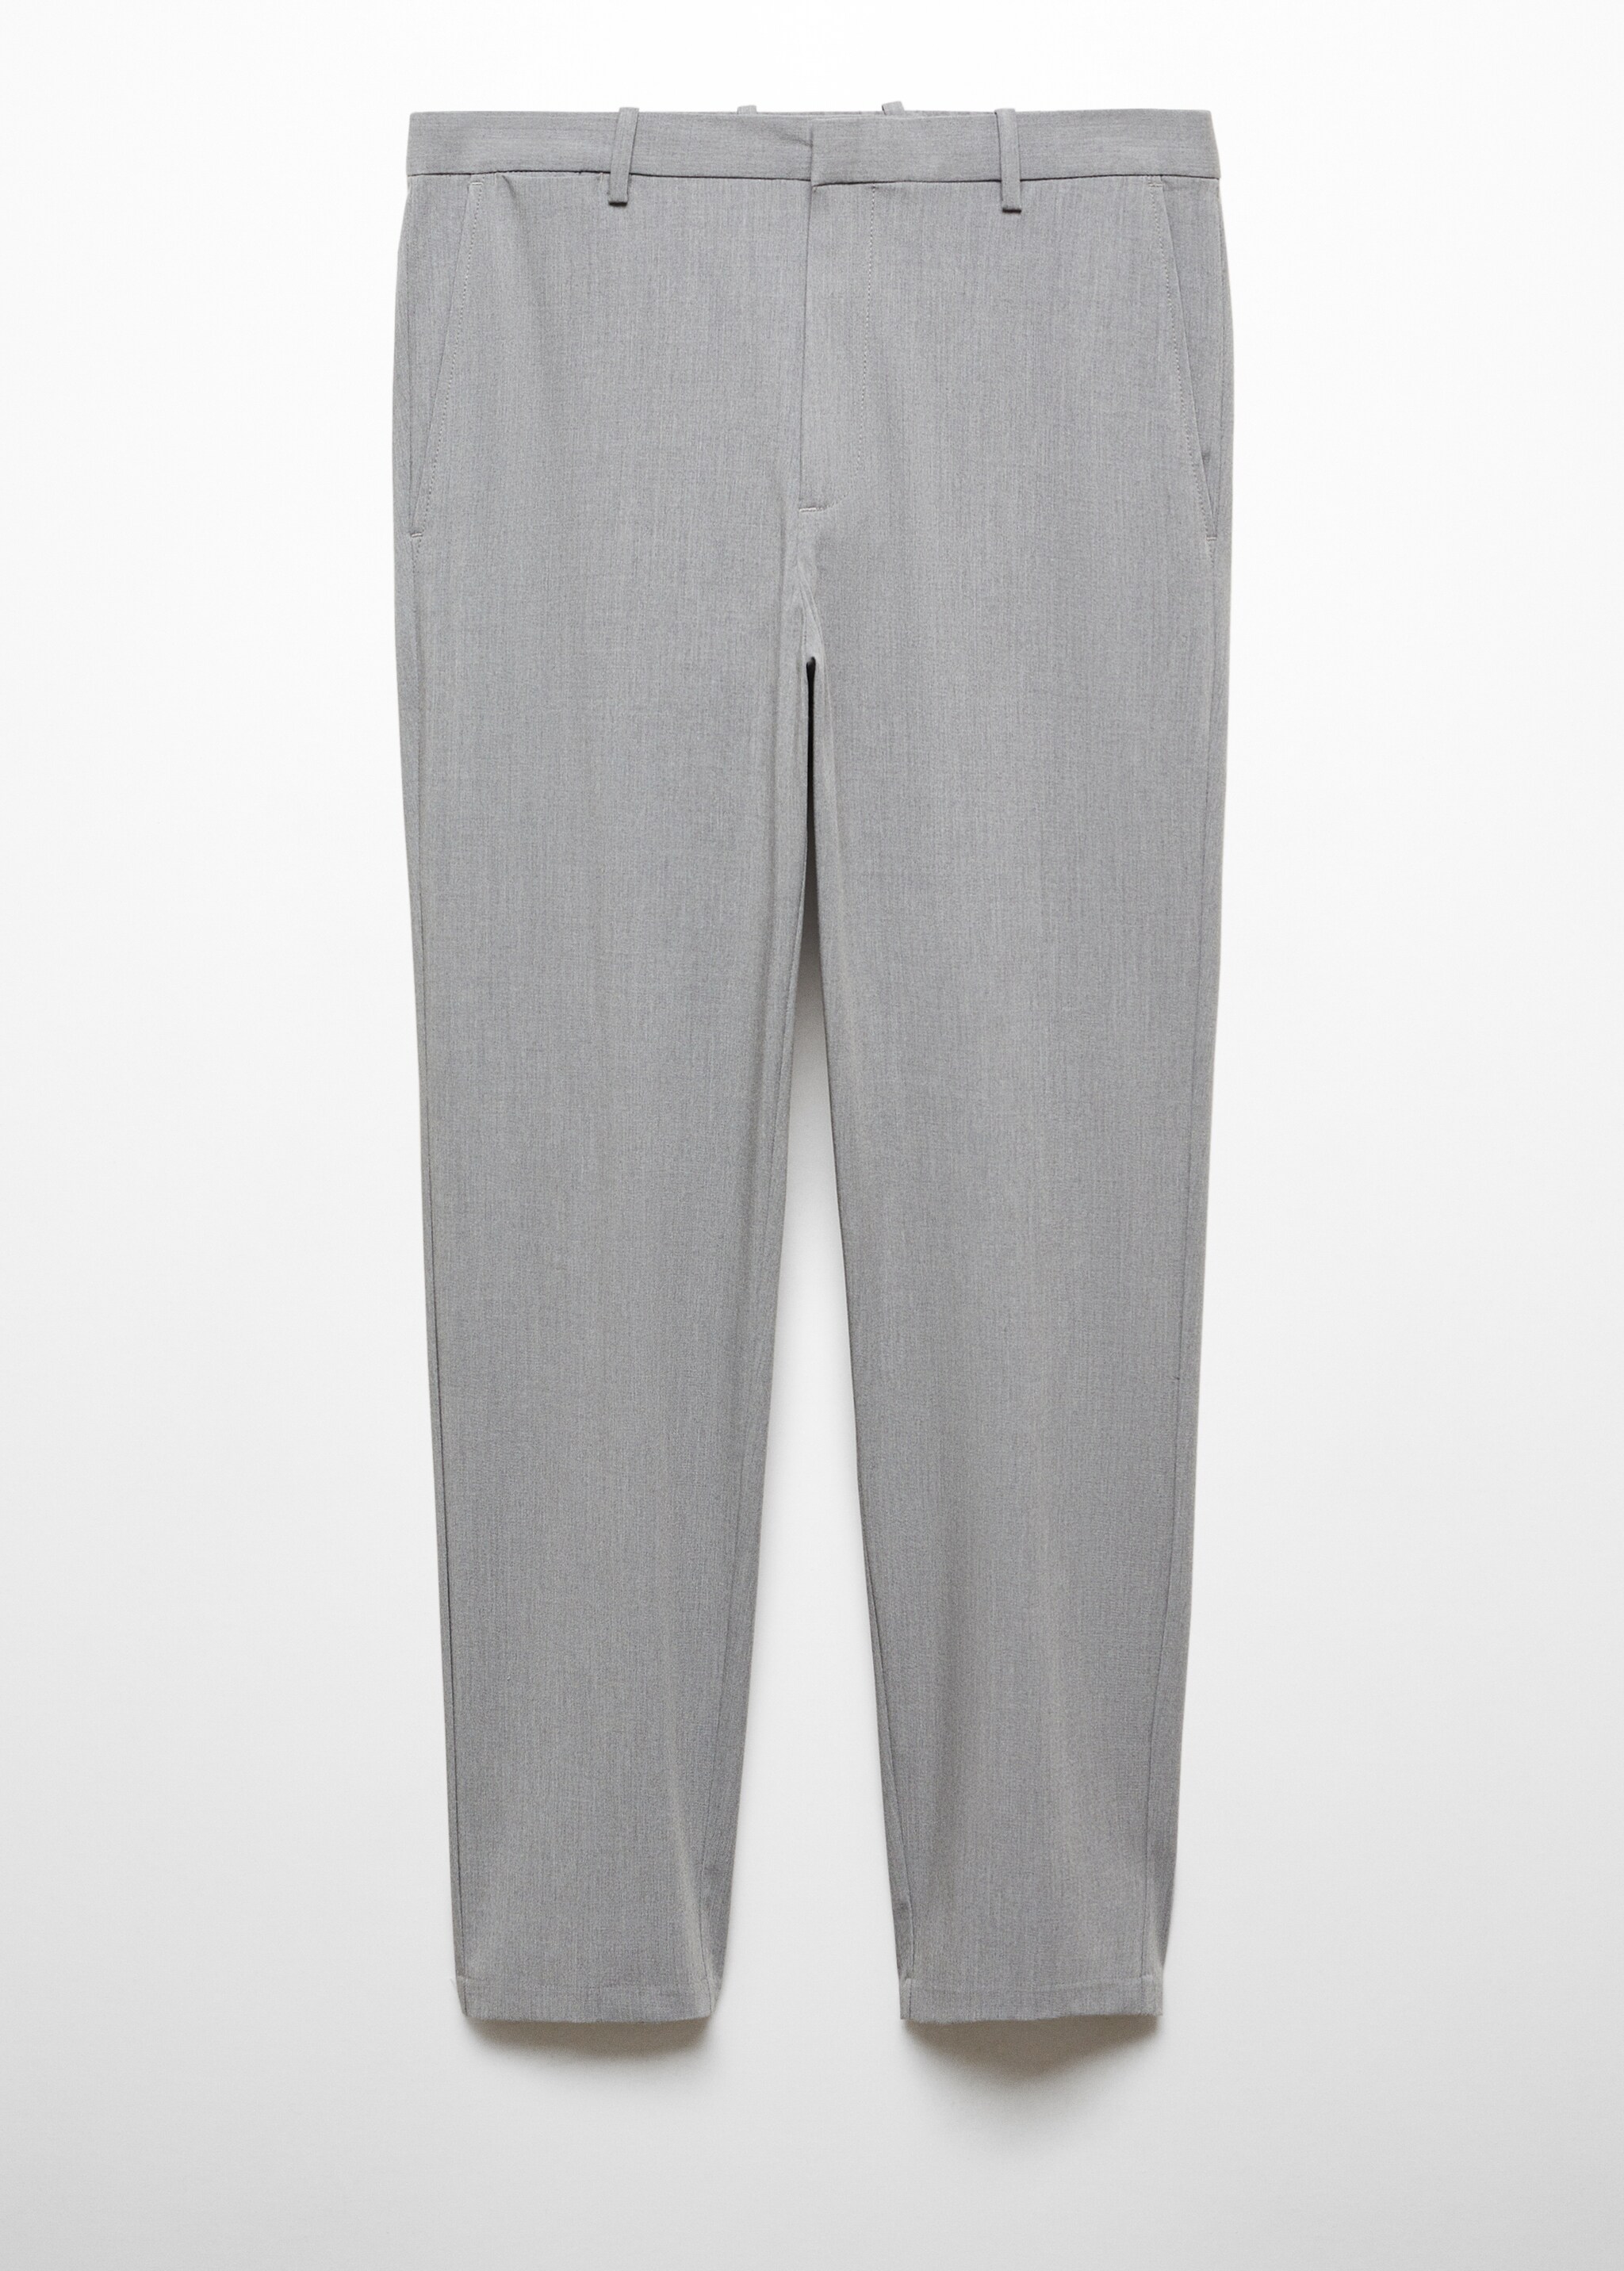 Slim fit stretch pants - Article without model